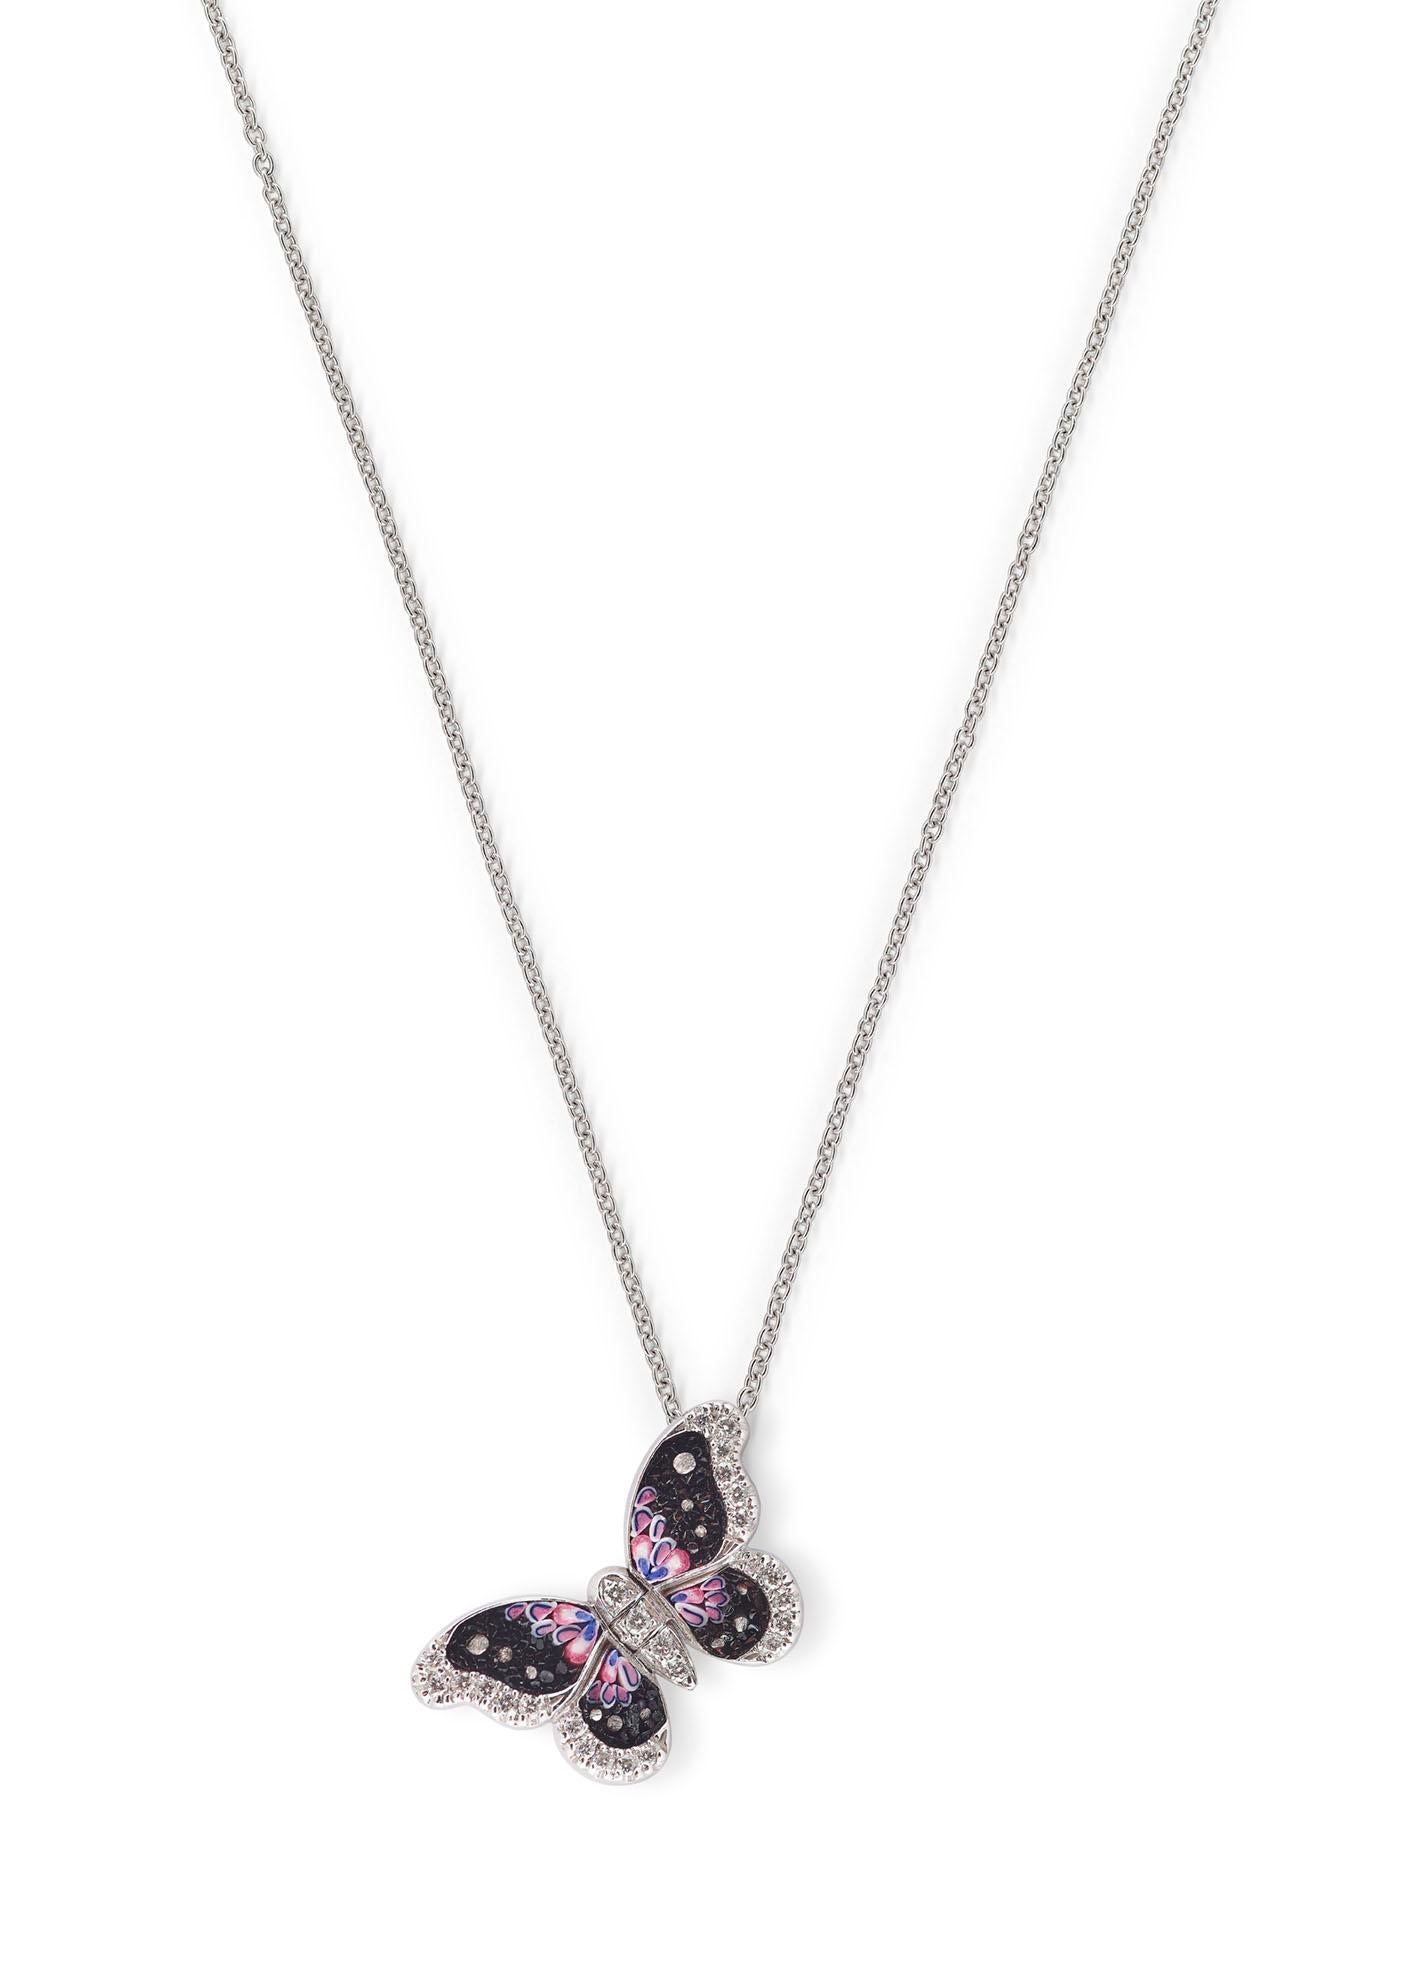 Brilliant Cut Stylish Necklace White Gold White Diamonds Hand Decorated with Micro Mosaic For Sale